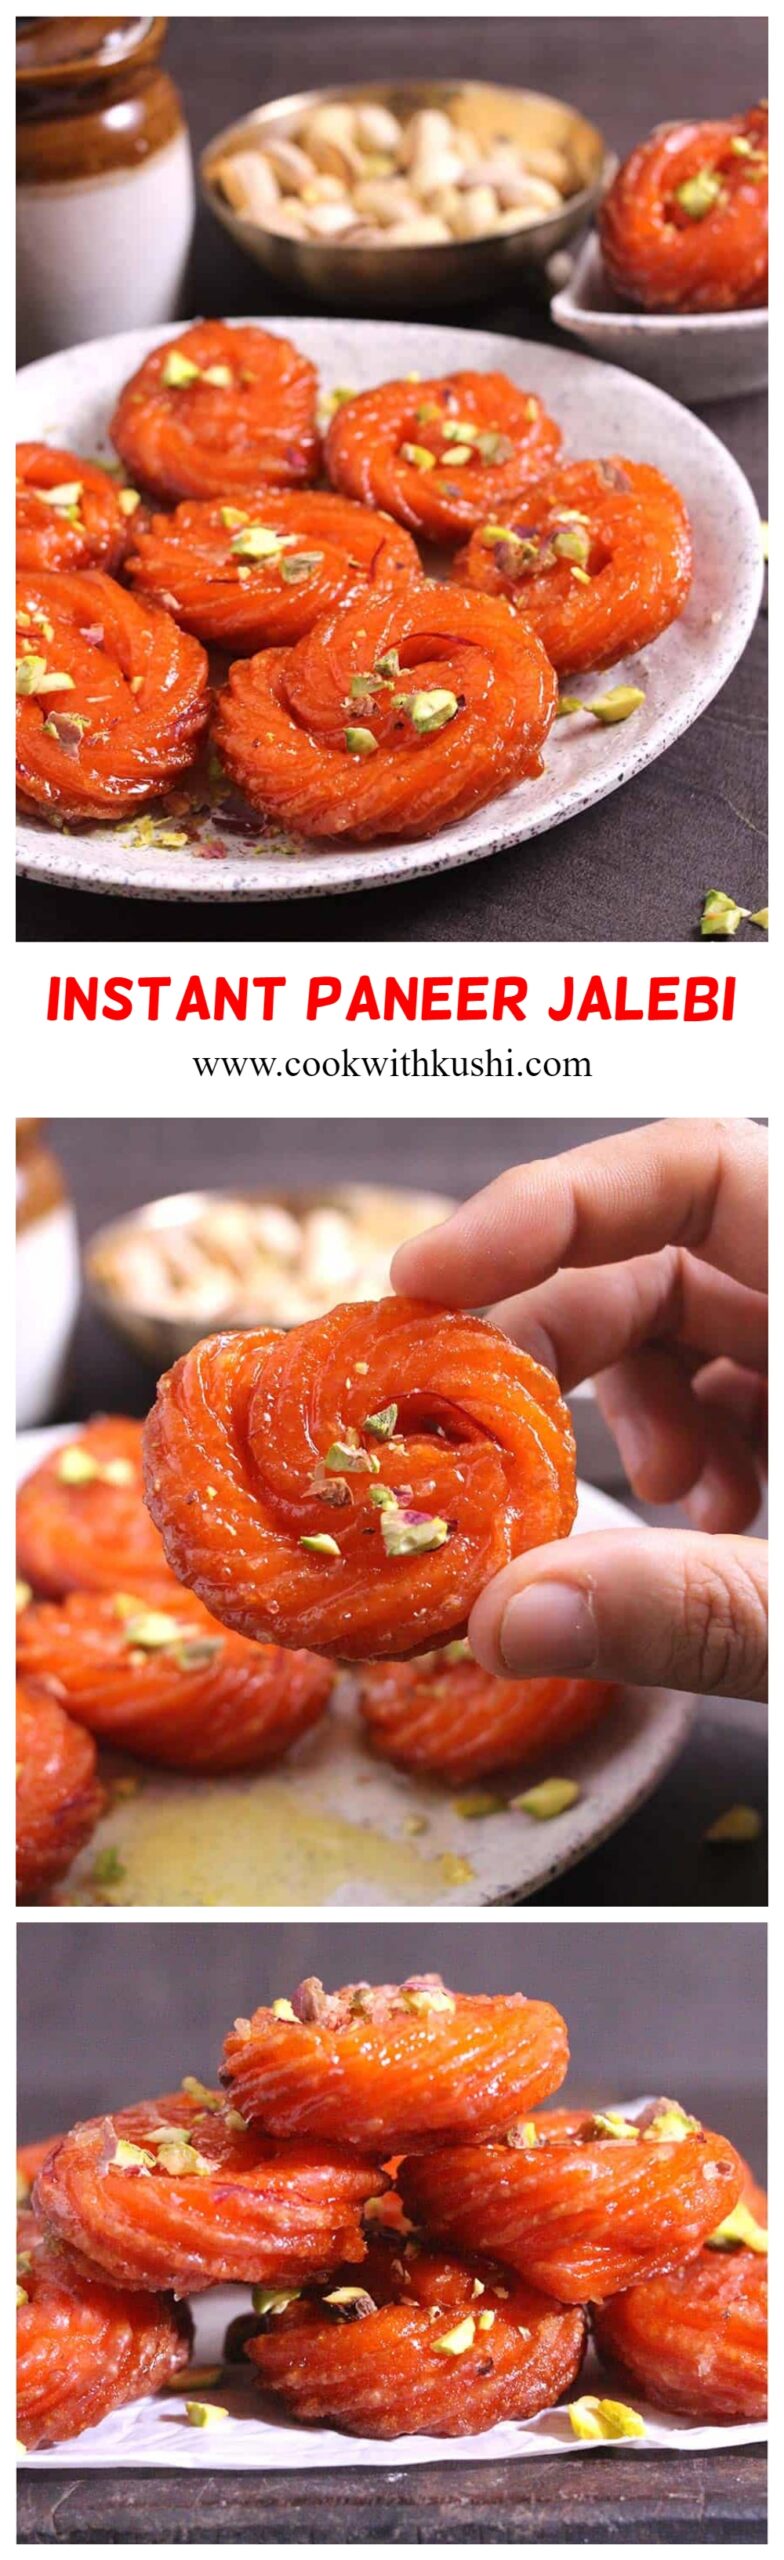 Paneer Jalebi or Chhena Jalebi is easy to make and popular Indian sweet or mithai that is crispy on the outside, juicy with a melt in mouth texture inside. #paneer #indiansweets #Mithai